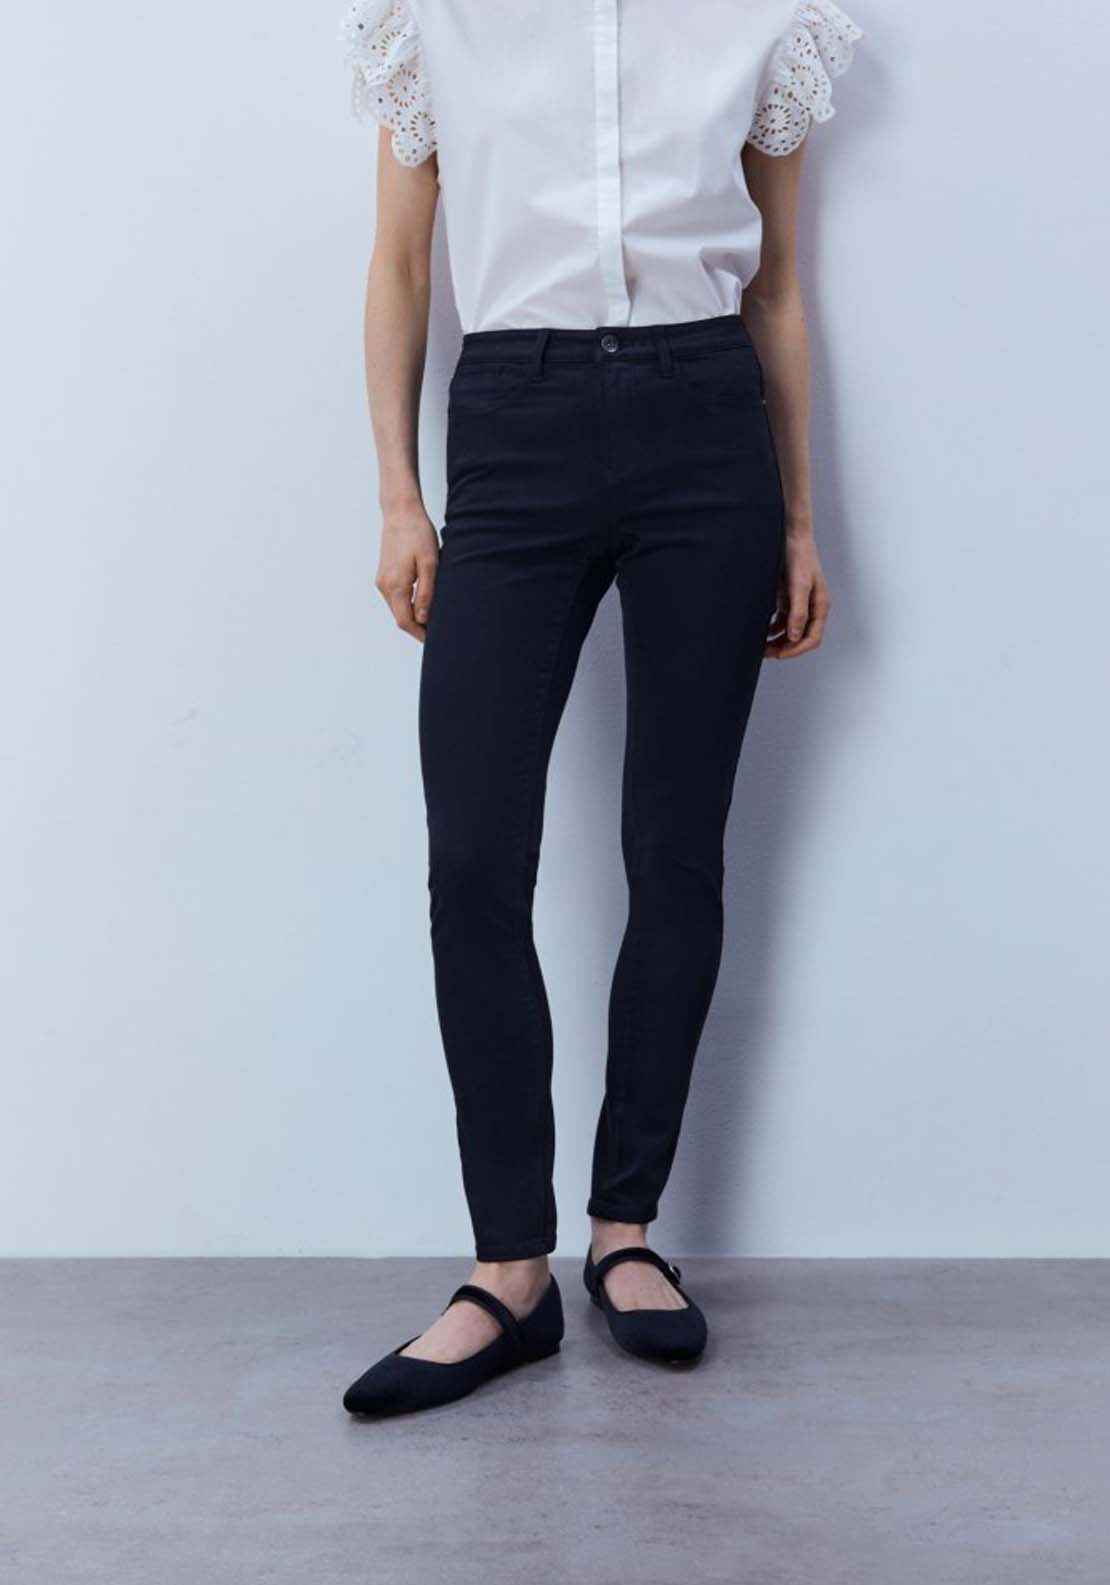 Sfera Coloured skinny jeans - Black 1 Shaws Department Stores